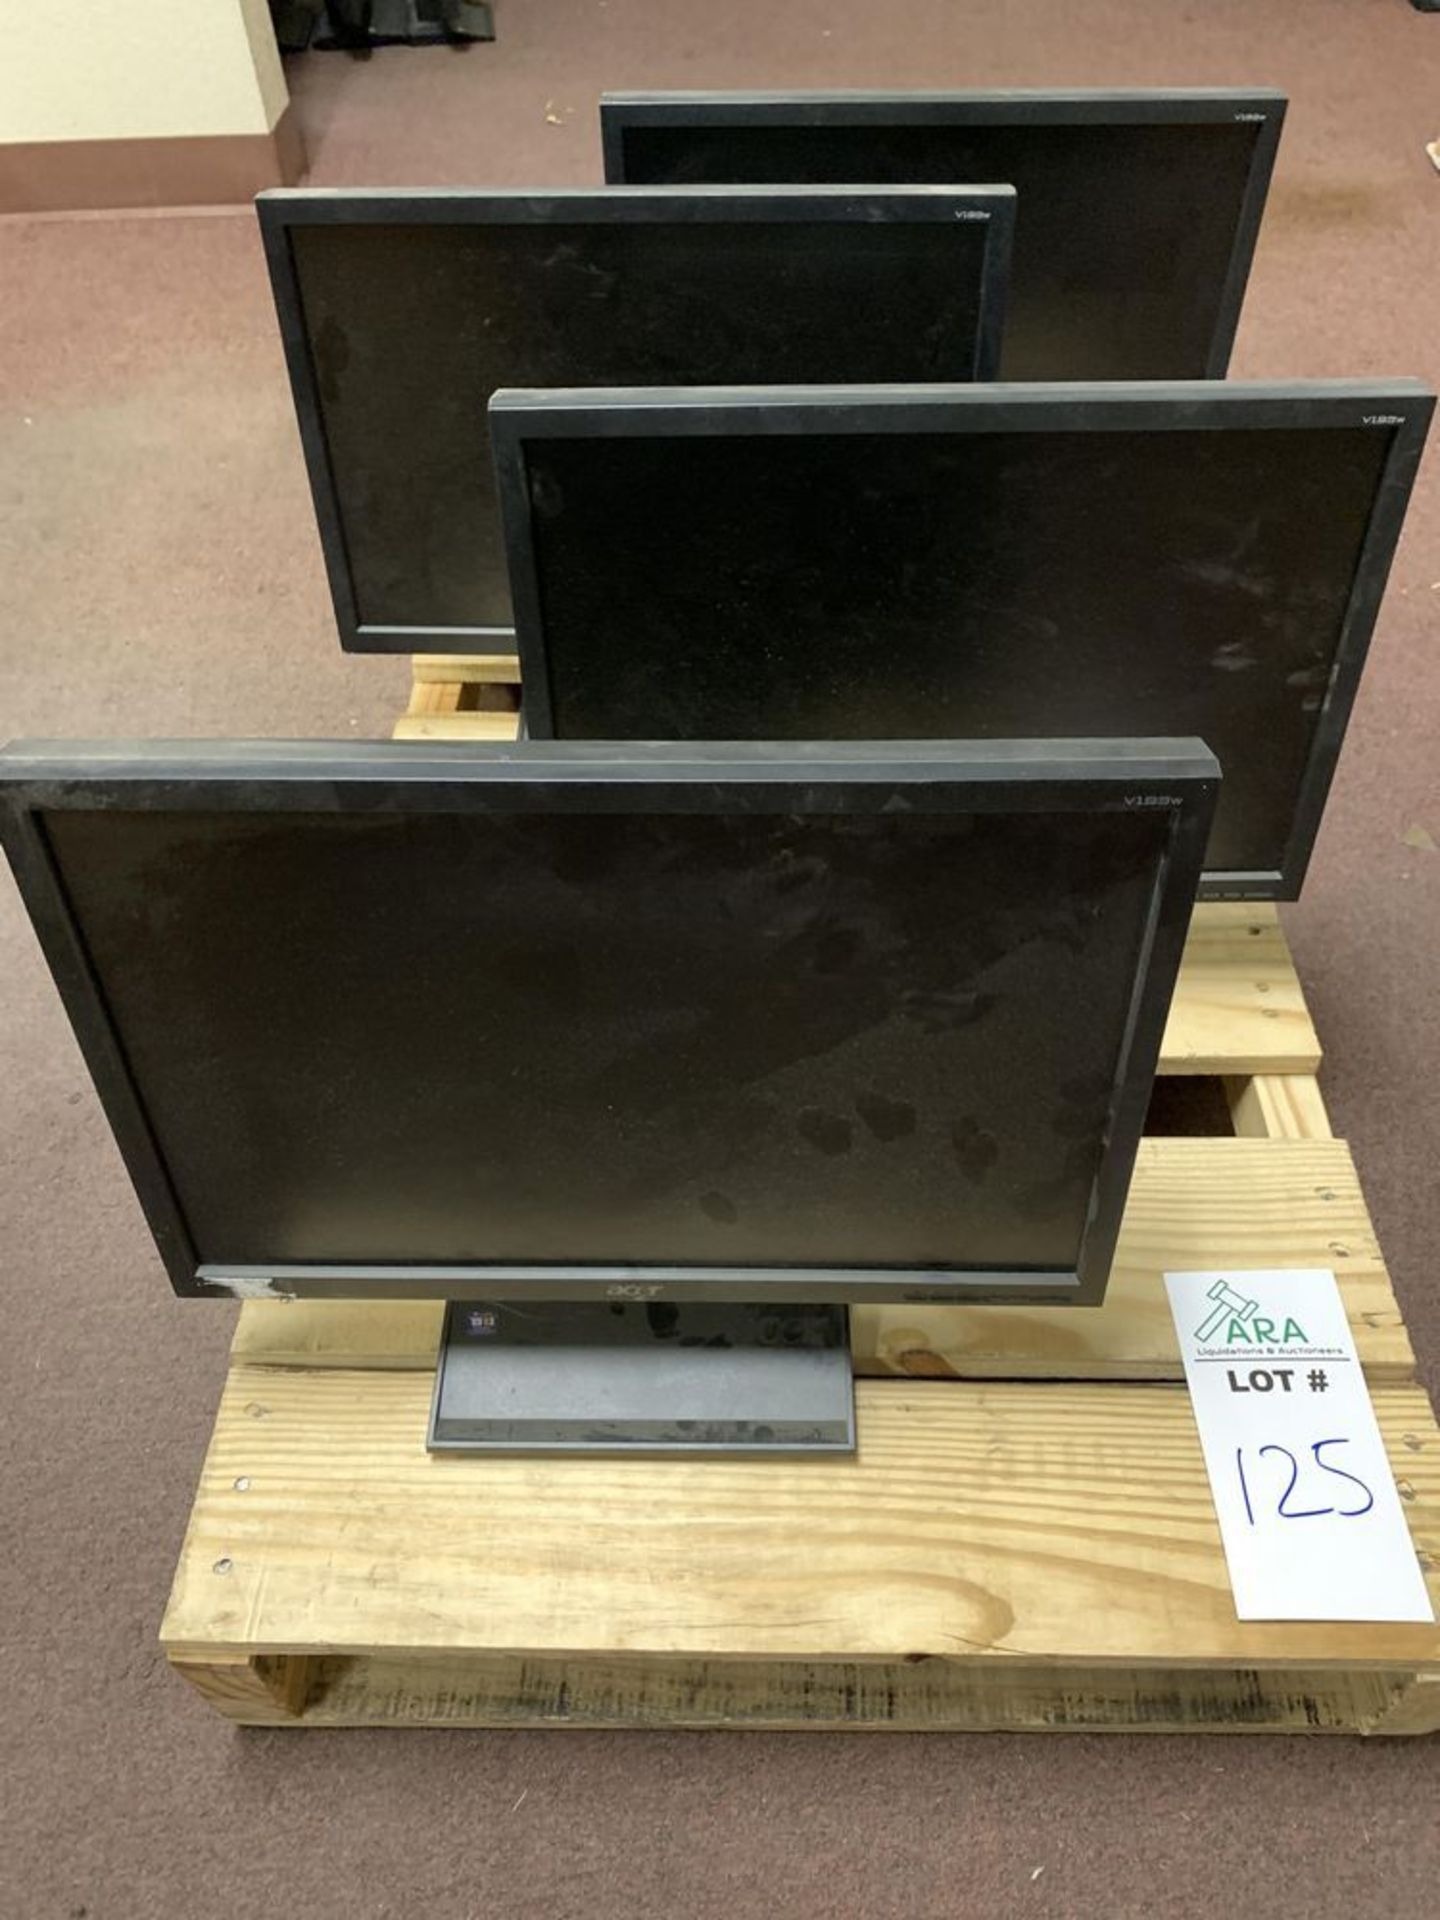 4 ACER V193W COMPUTER MONITORS. ALL ITEMS ARE SOLD AS IS UNTESTED BUT CAME FROM A WORKING - Image 2 of 3